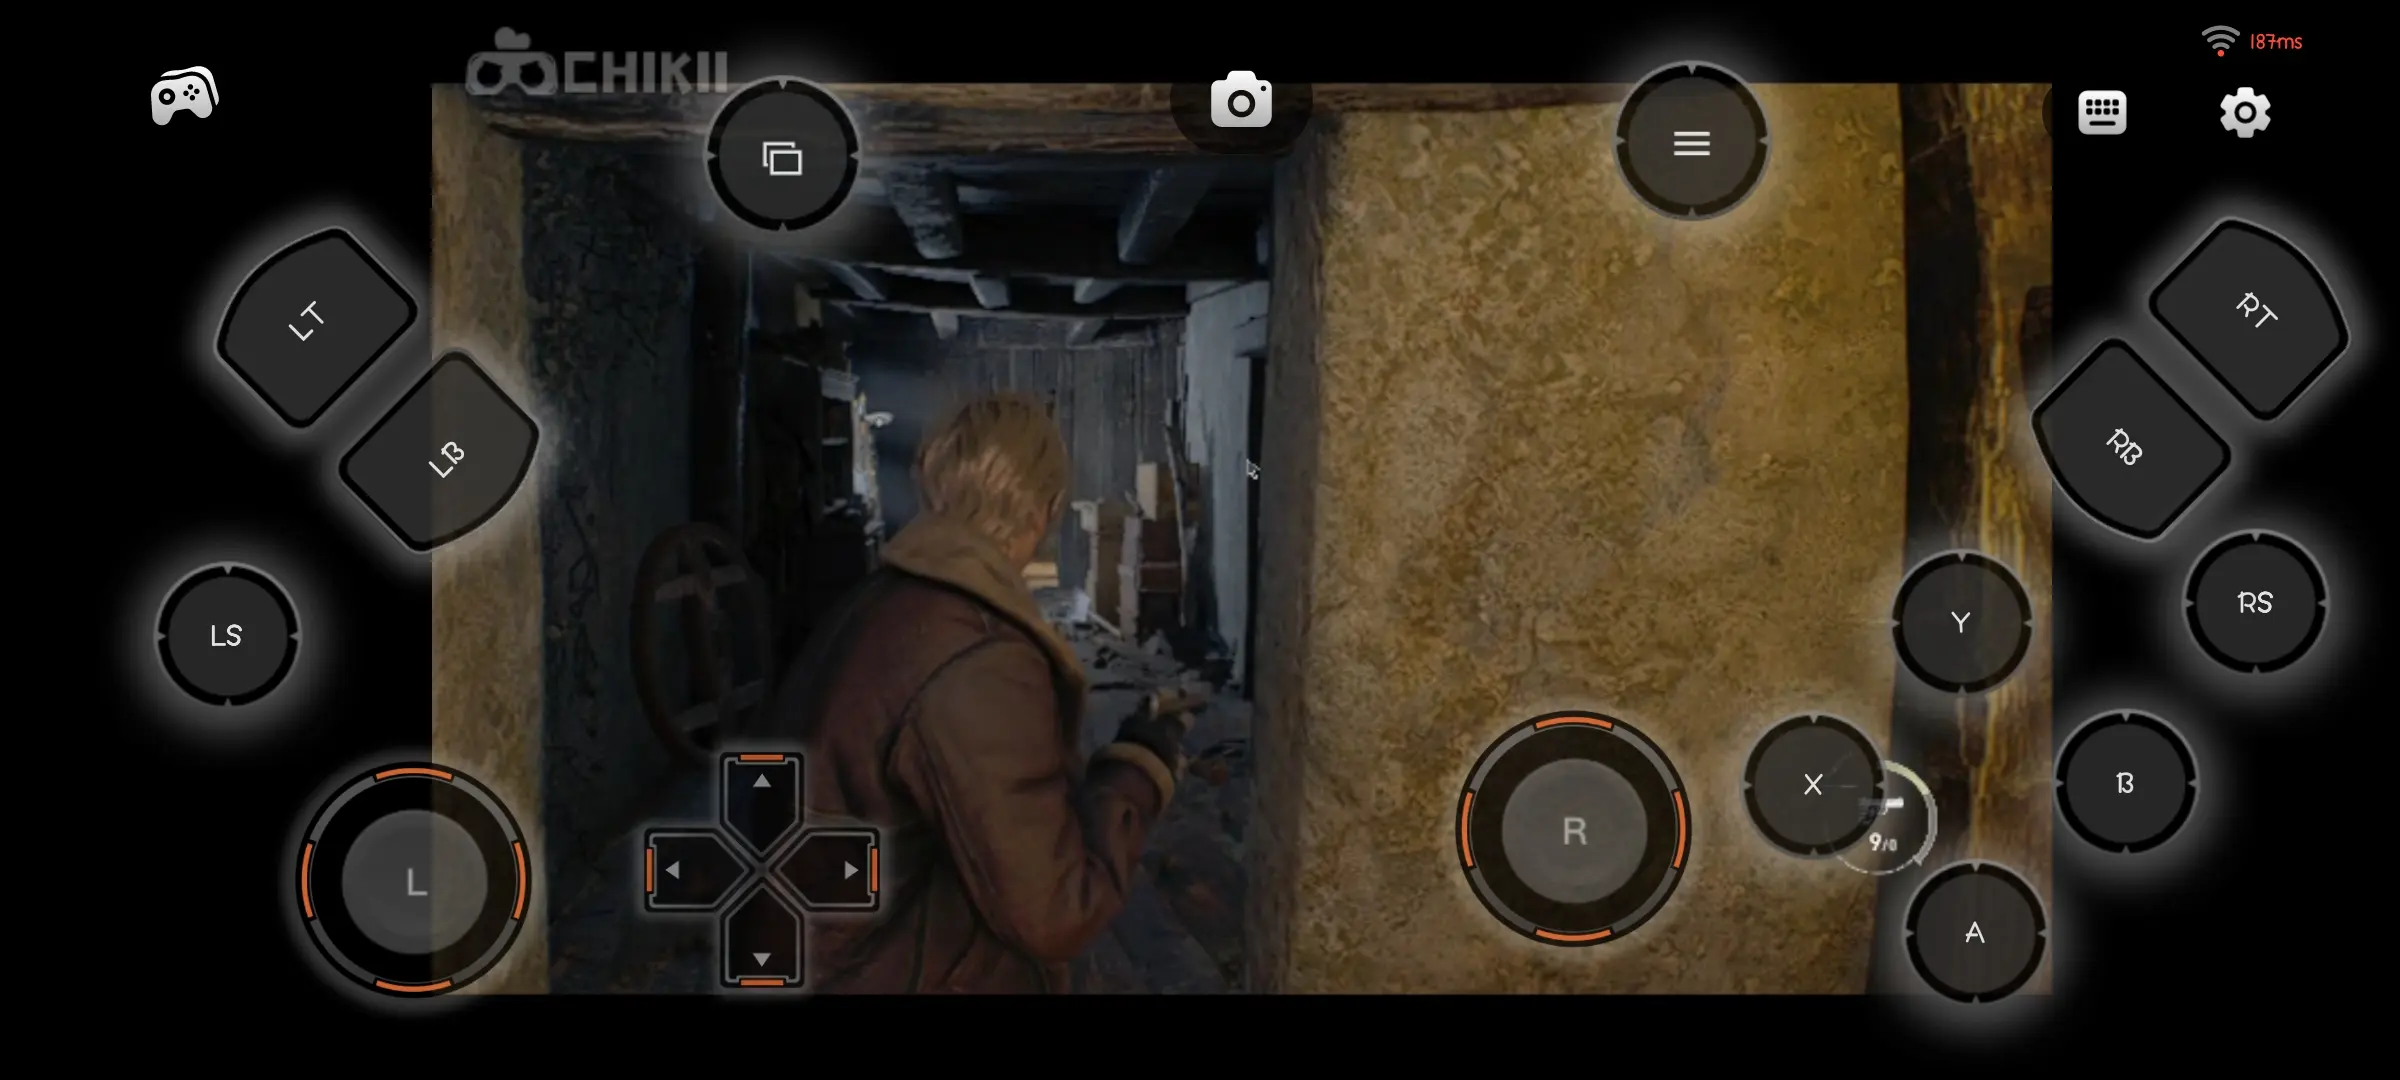 Resident Evil 4 remake apk obb download - cloud gaming app android - Chikii